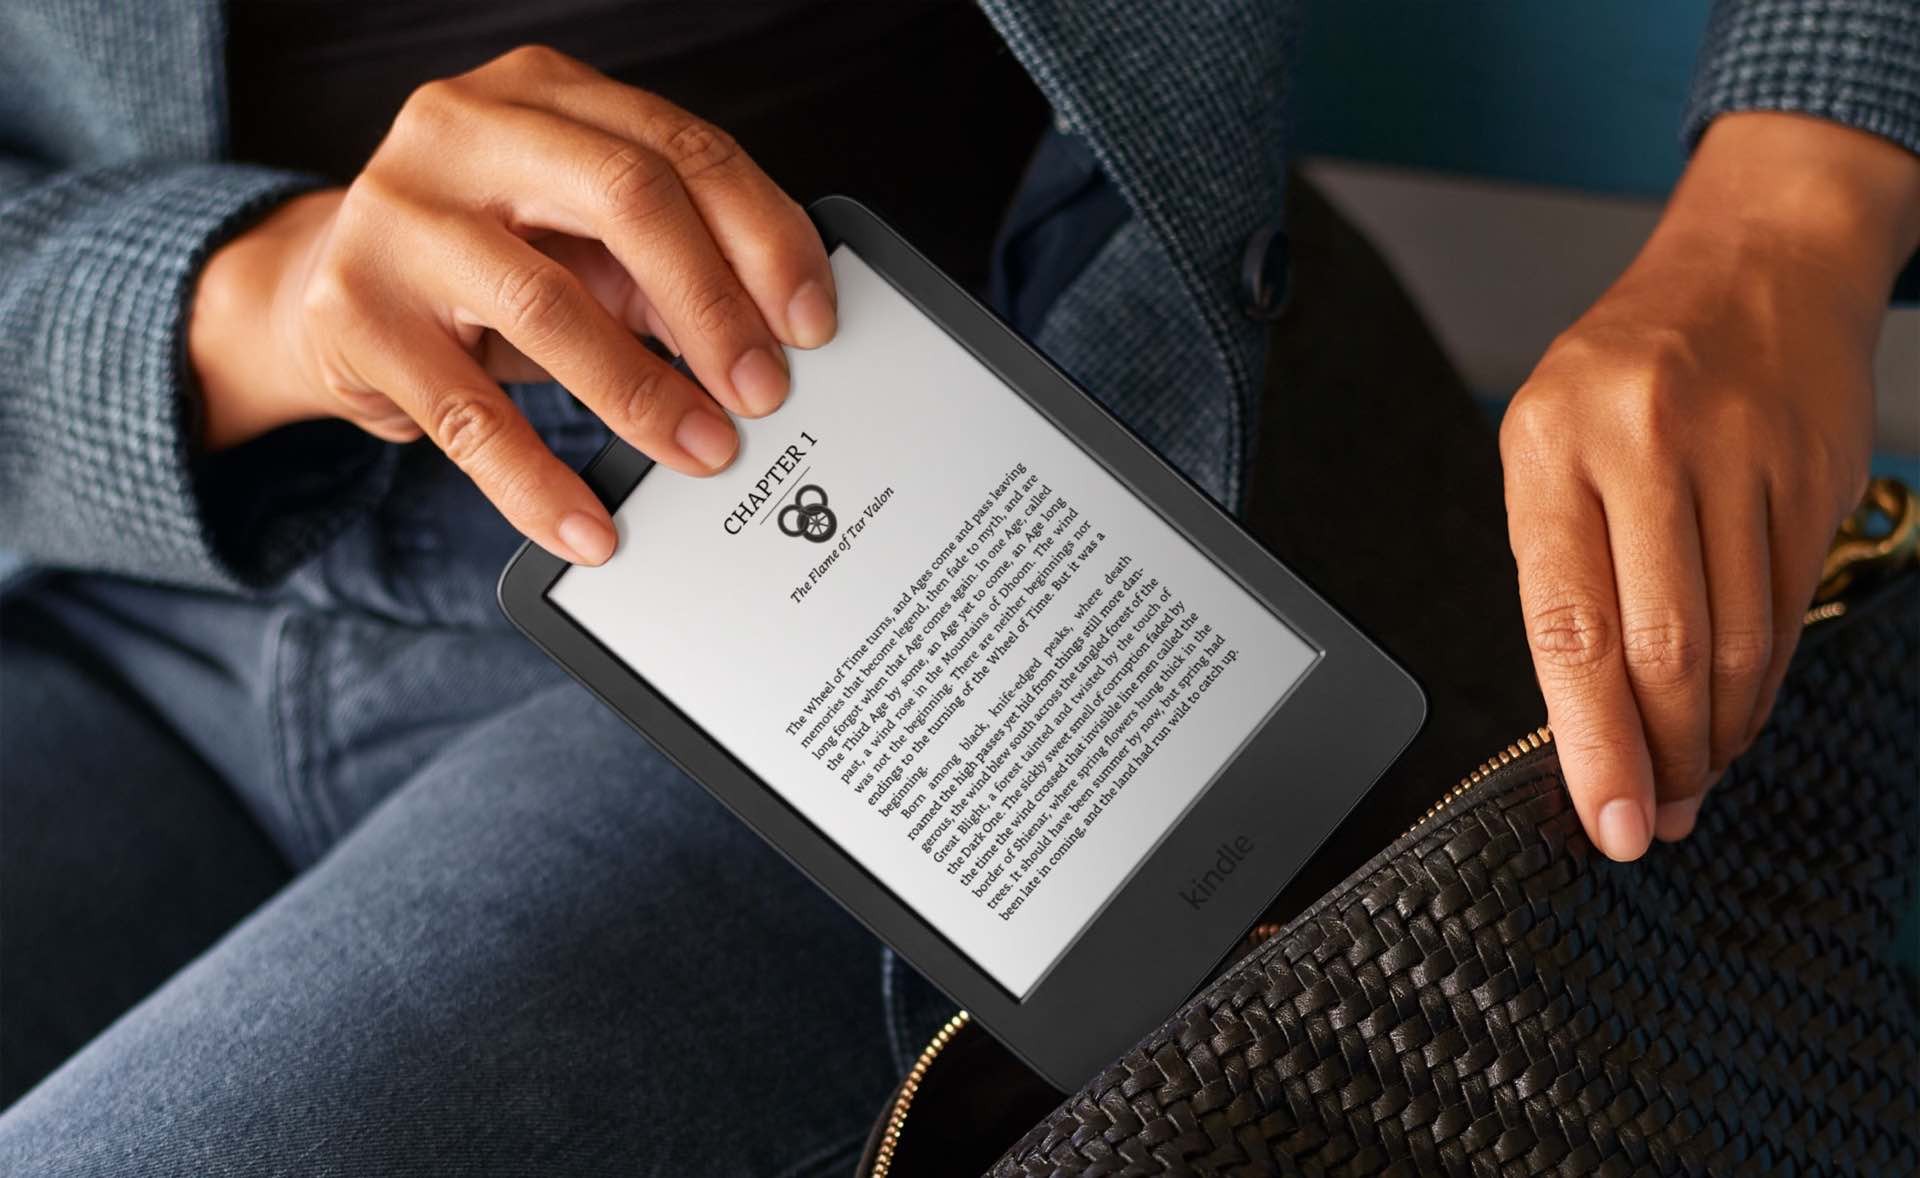 The 2022 base-model Amazon Kindle e-reader. ($100 with lockscreen ads, $120 without ads)